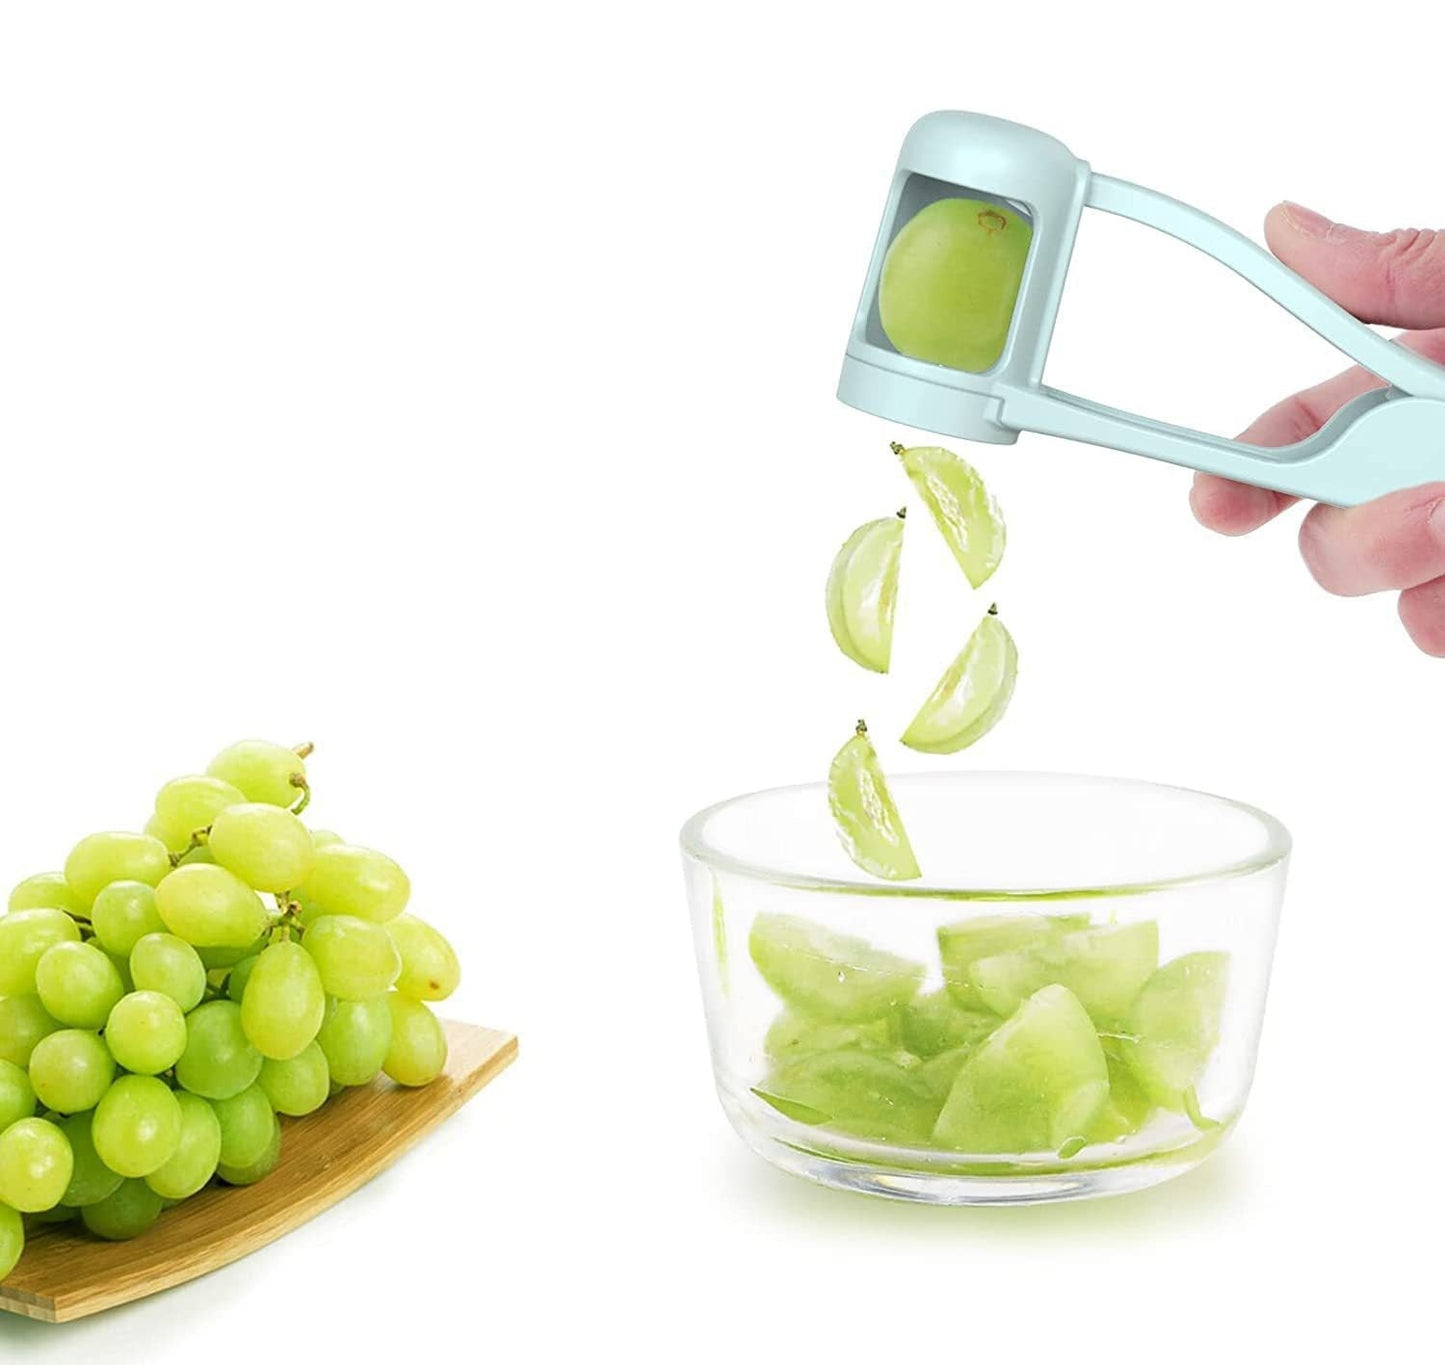 The grape cutter will quarter your grapes and cherry tomatoes easily and effortlessly